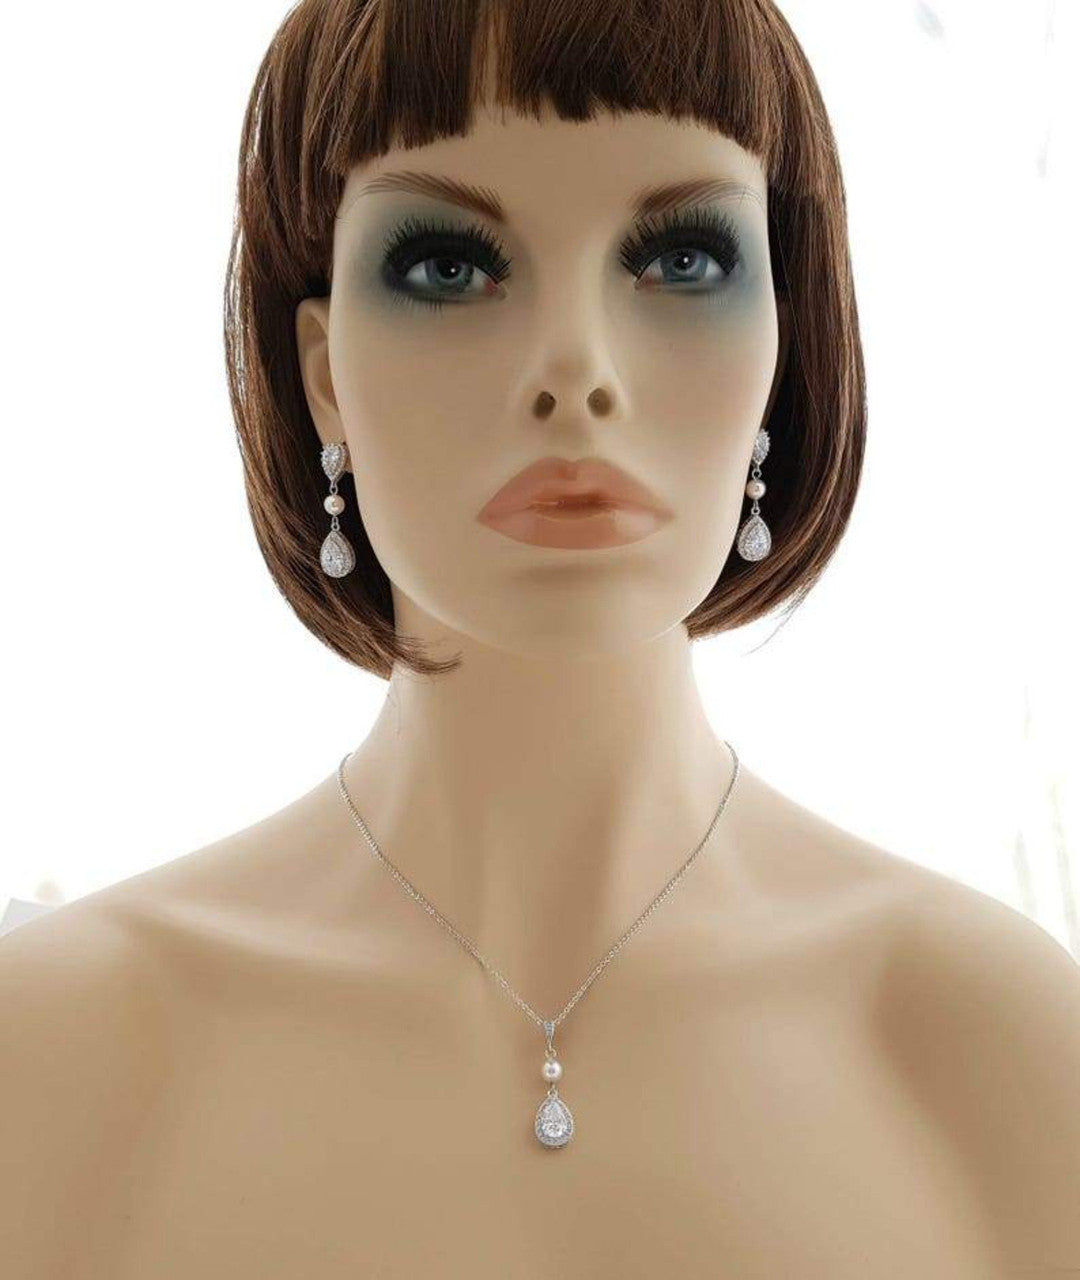 Drop Pearl and Crystal Earring and Necklace Set- Emma